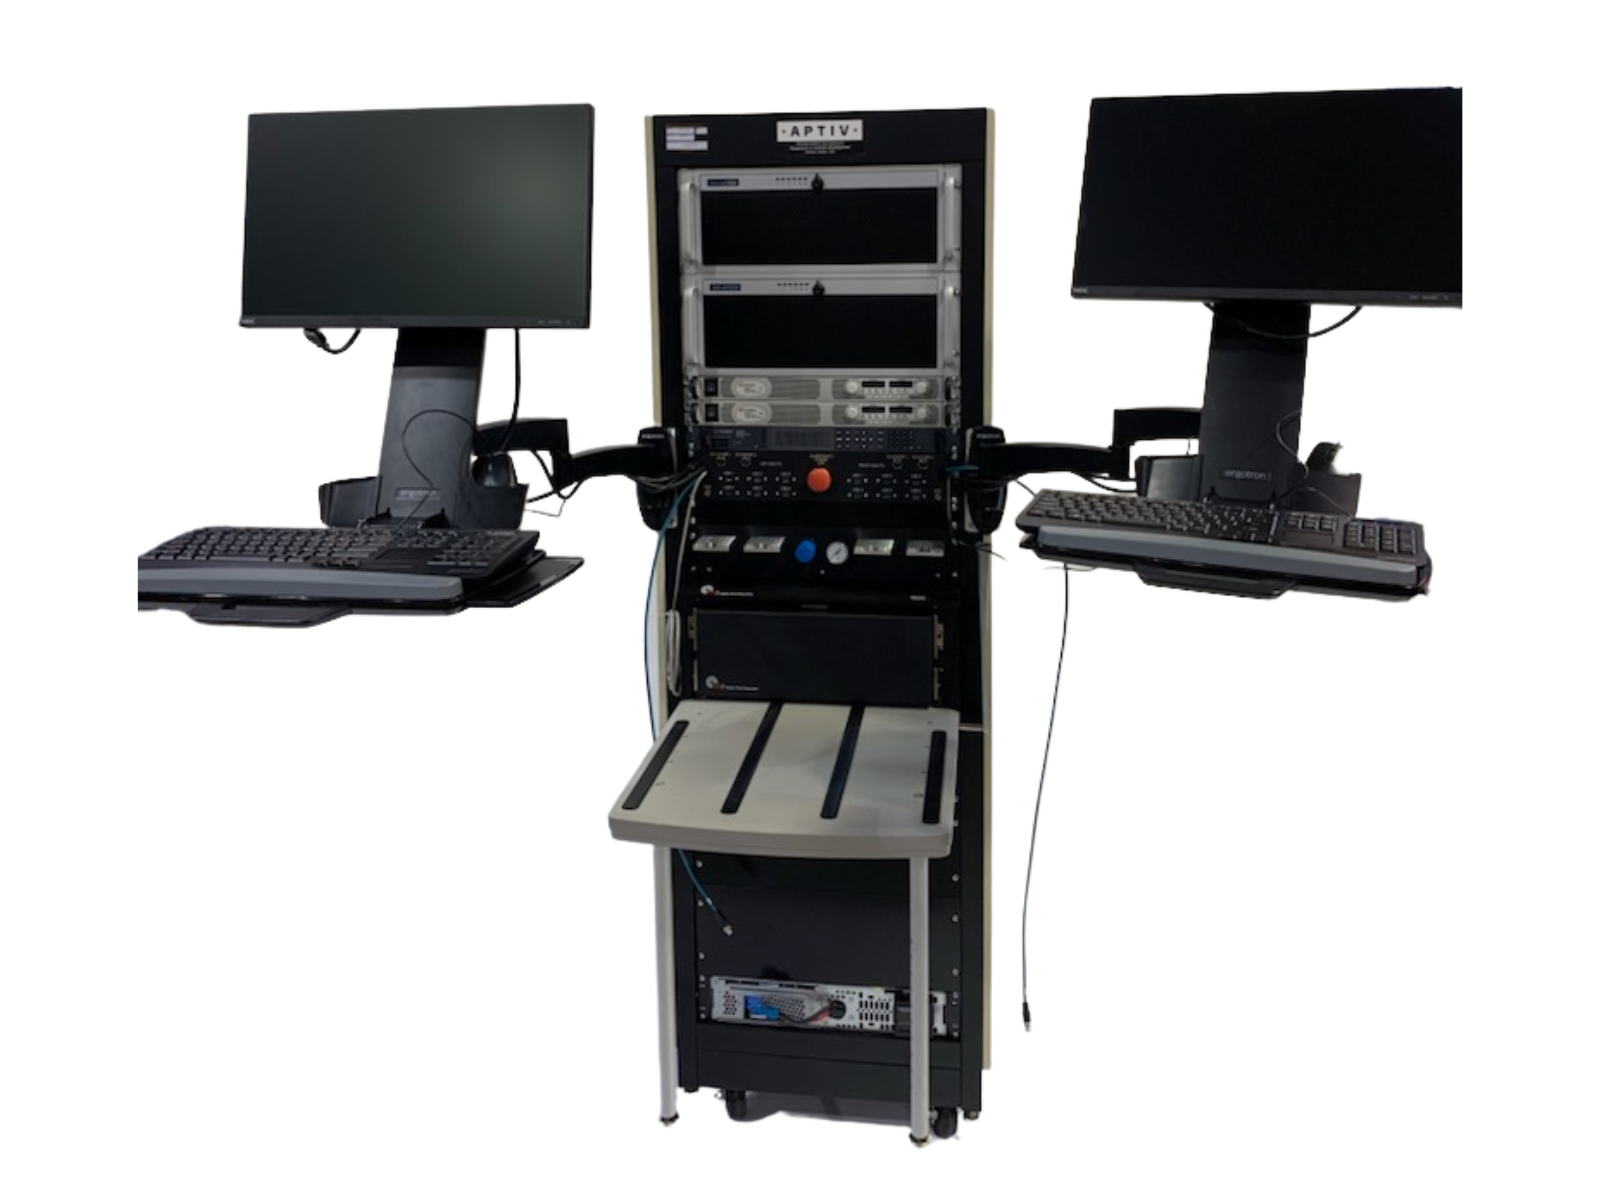 Automotive Dual PC PXI Tester - Ball Systems